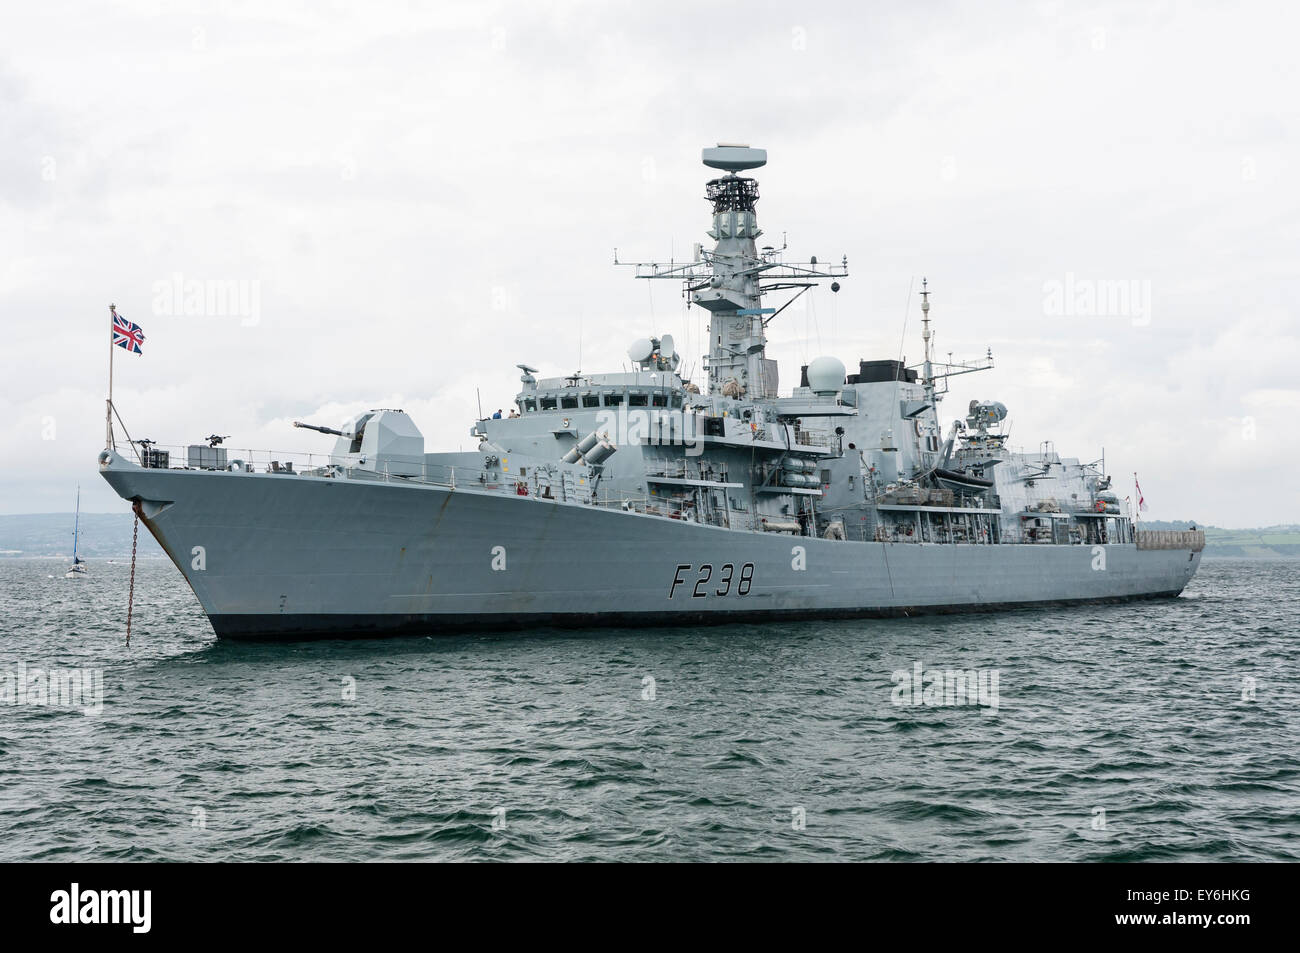 Belfast, Northern Ireland. 5 Jul 2015 - HMS Northumberland, a Type 23 frigate of the Royal Navy, anchored at sea Stock Photo